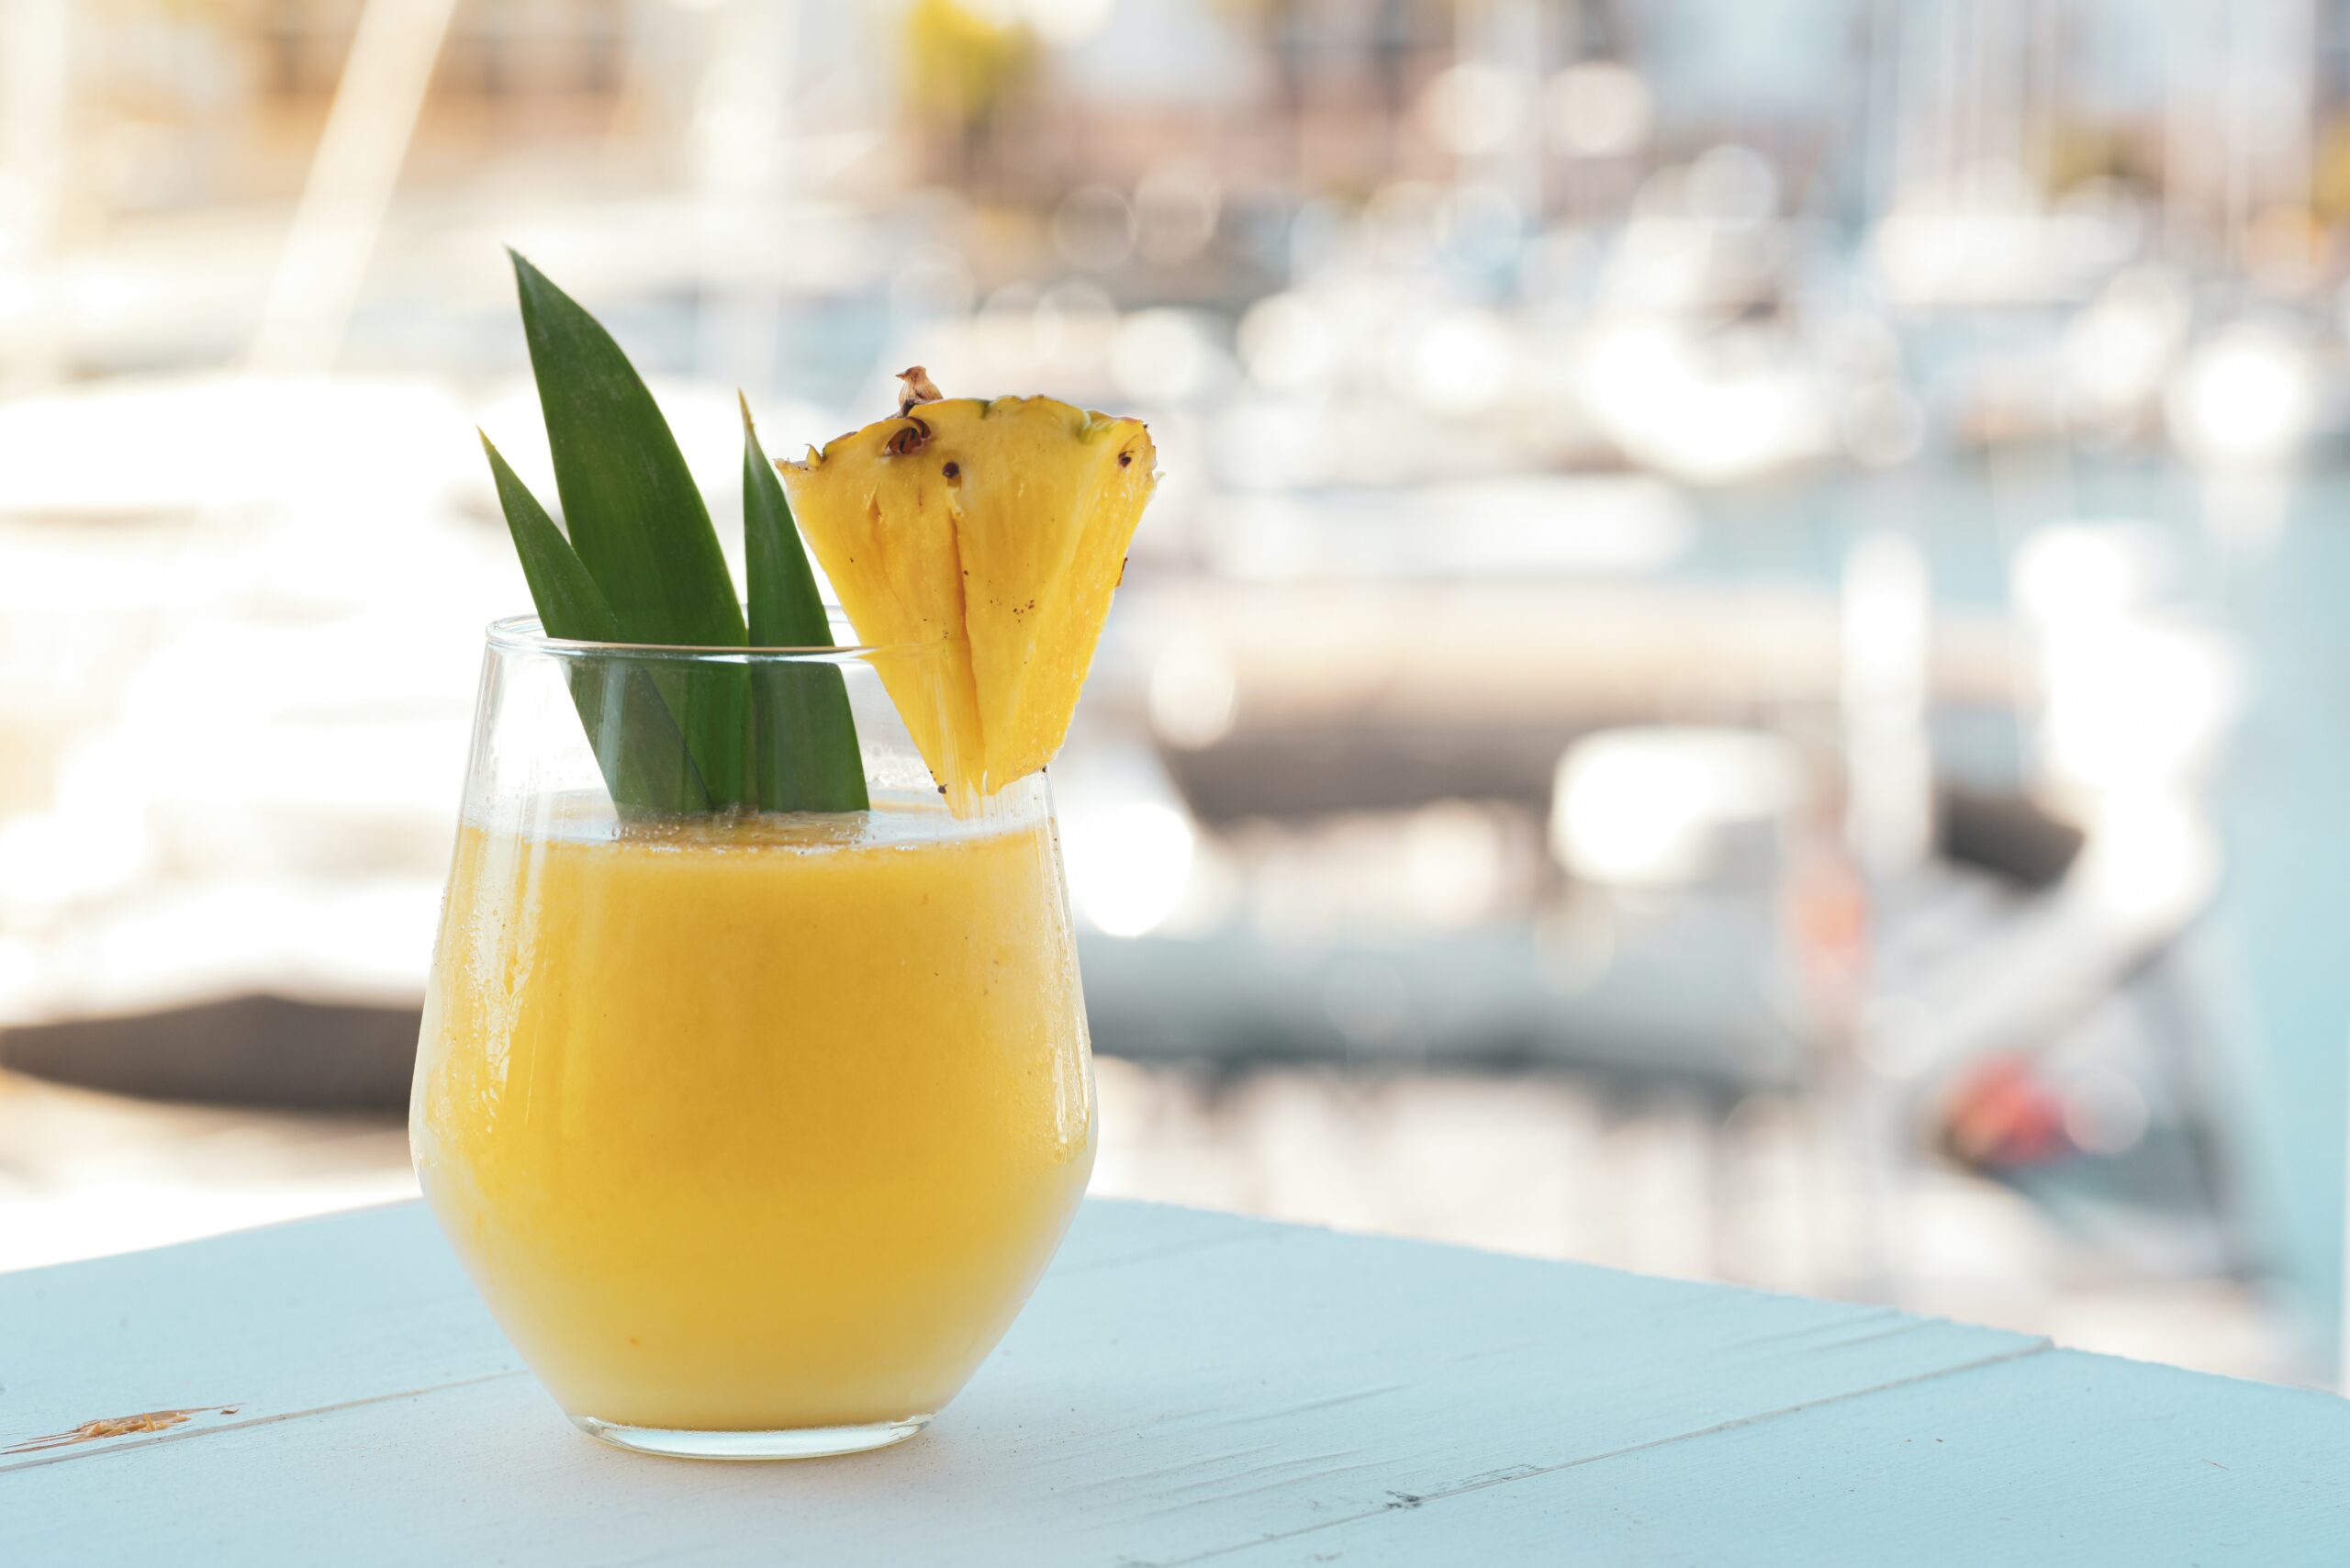 Make this cortisol mocktail for yourself or your guests at a summer party. Pictured: pineapple juice